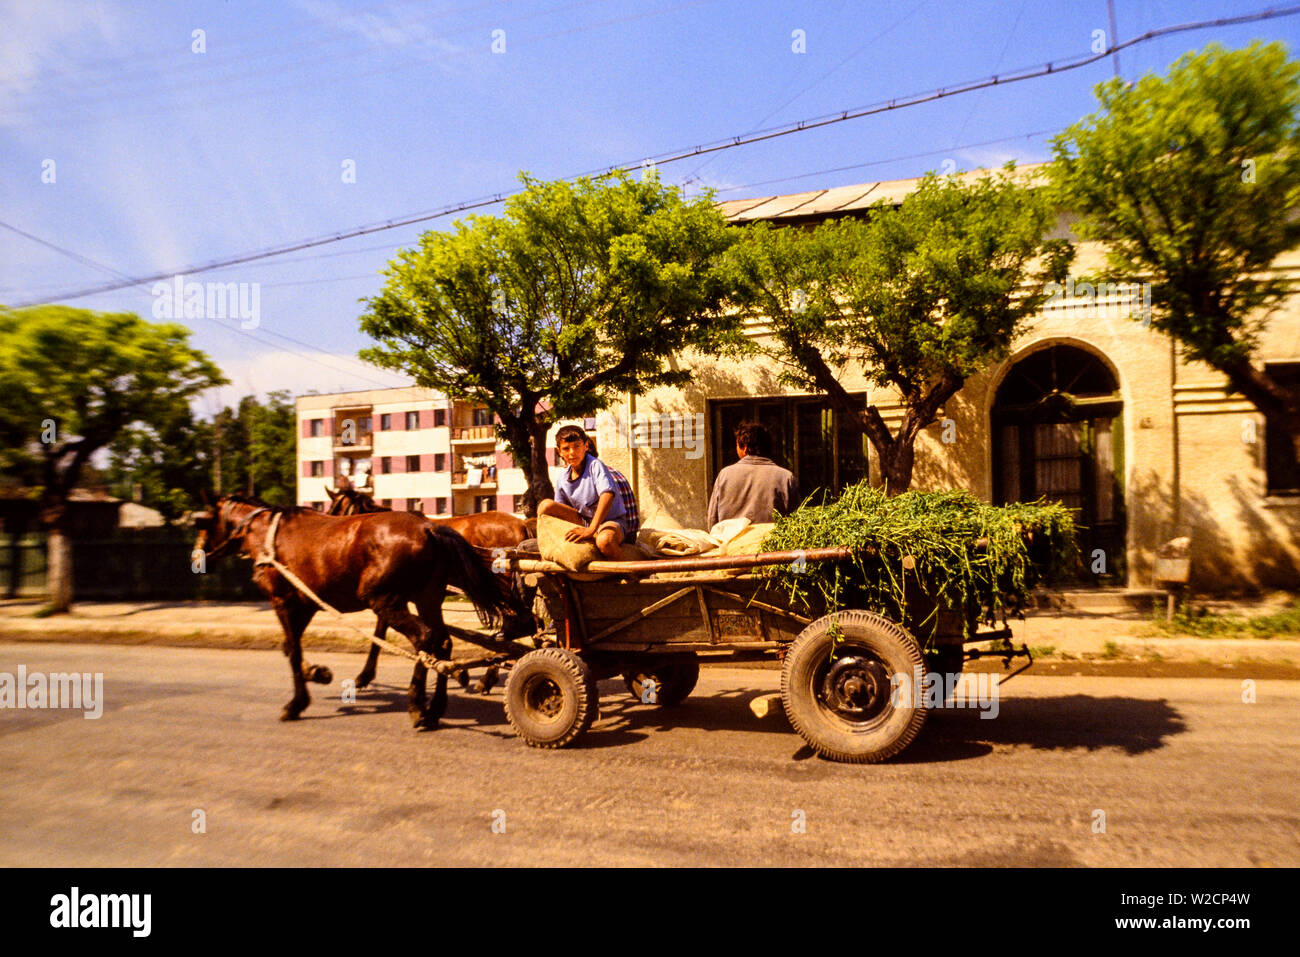 Romania, May 1990. Rural scene. A boy stares from a cart laden with fodder and pulled by two horses. Photo: © Simon Grosset. Archive: Image digitised from an original transparency. Stock Photo